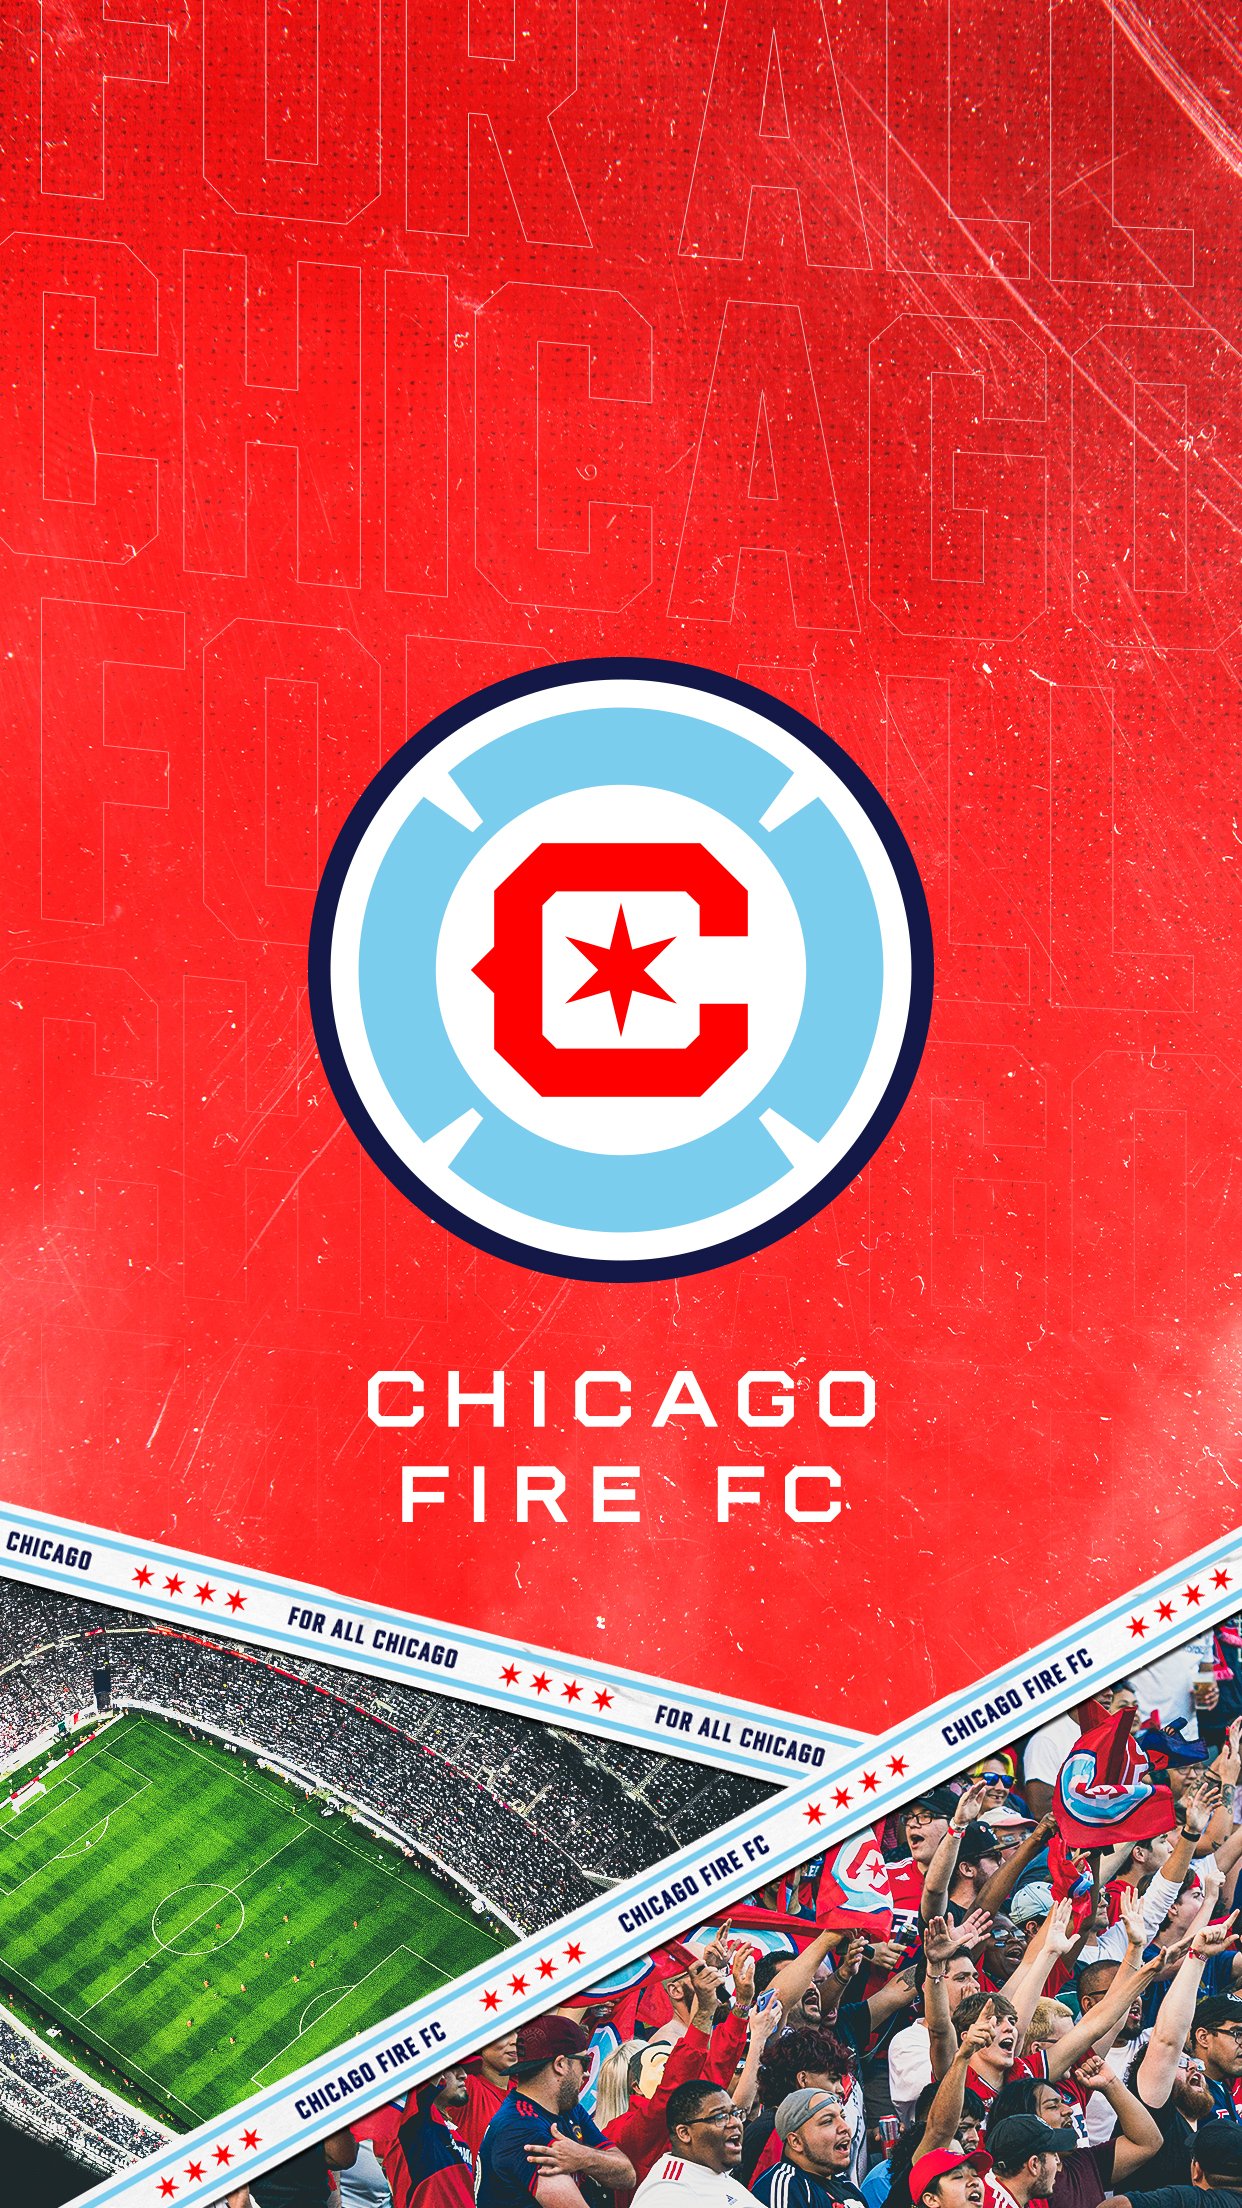 Chicago Fire FC on Fresh wallpapers for your Wednesday